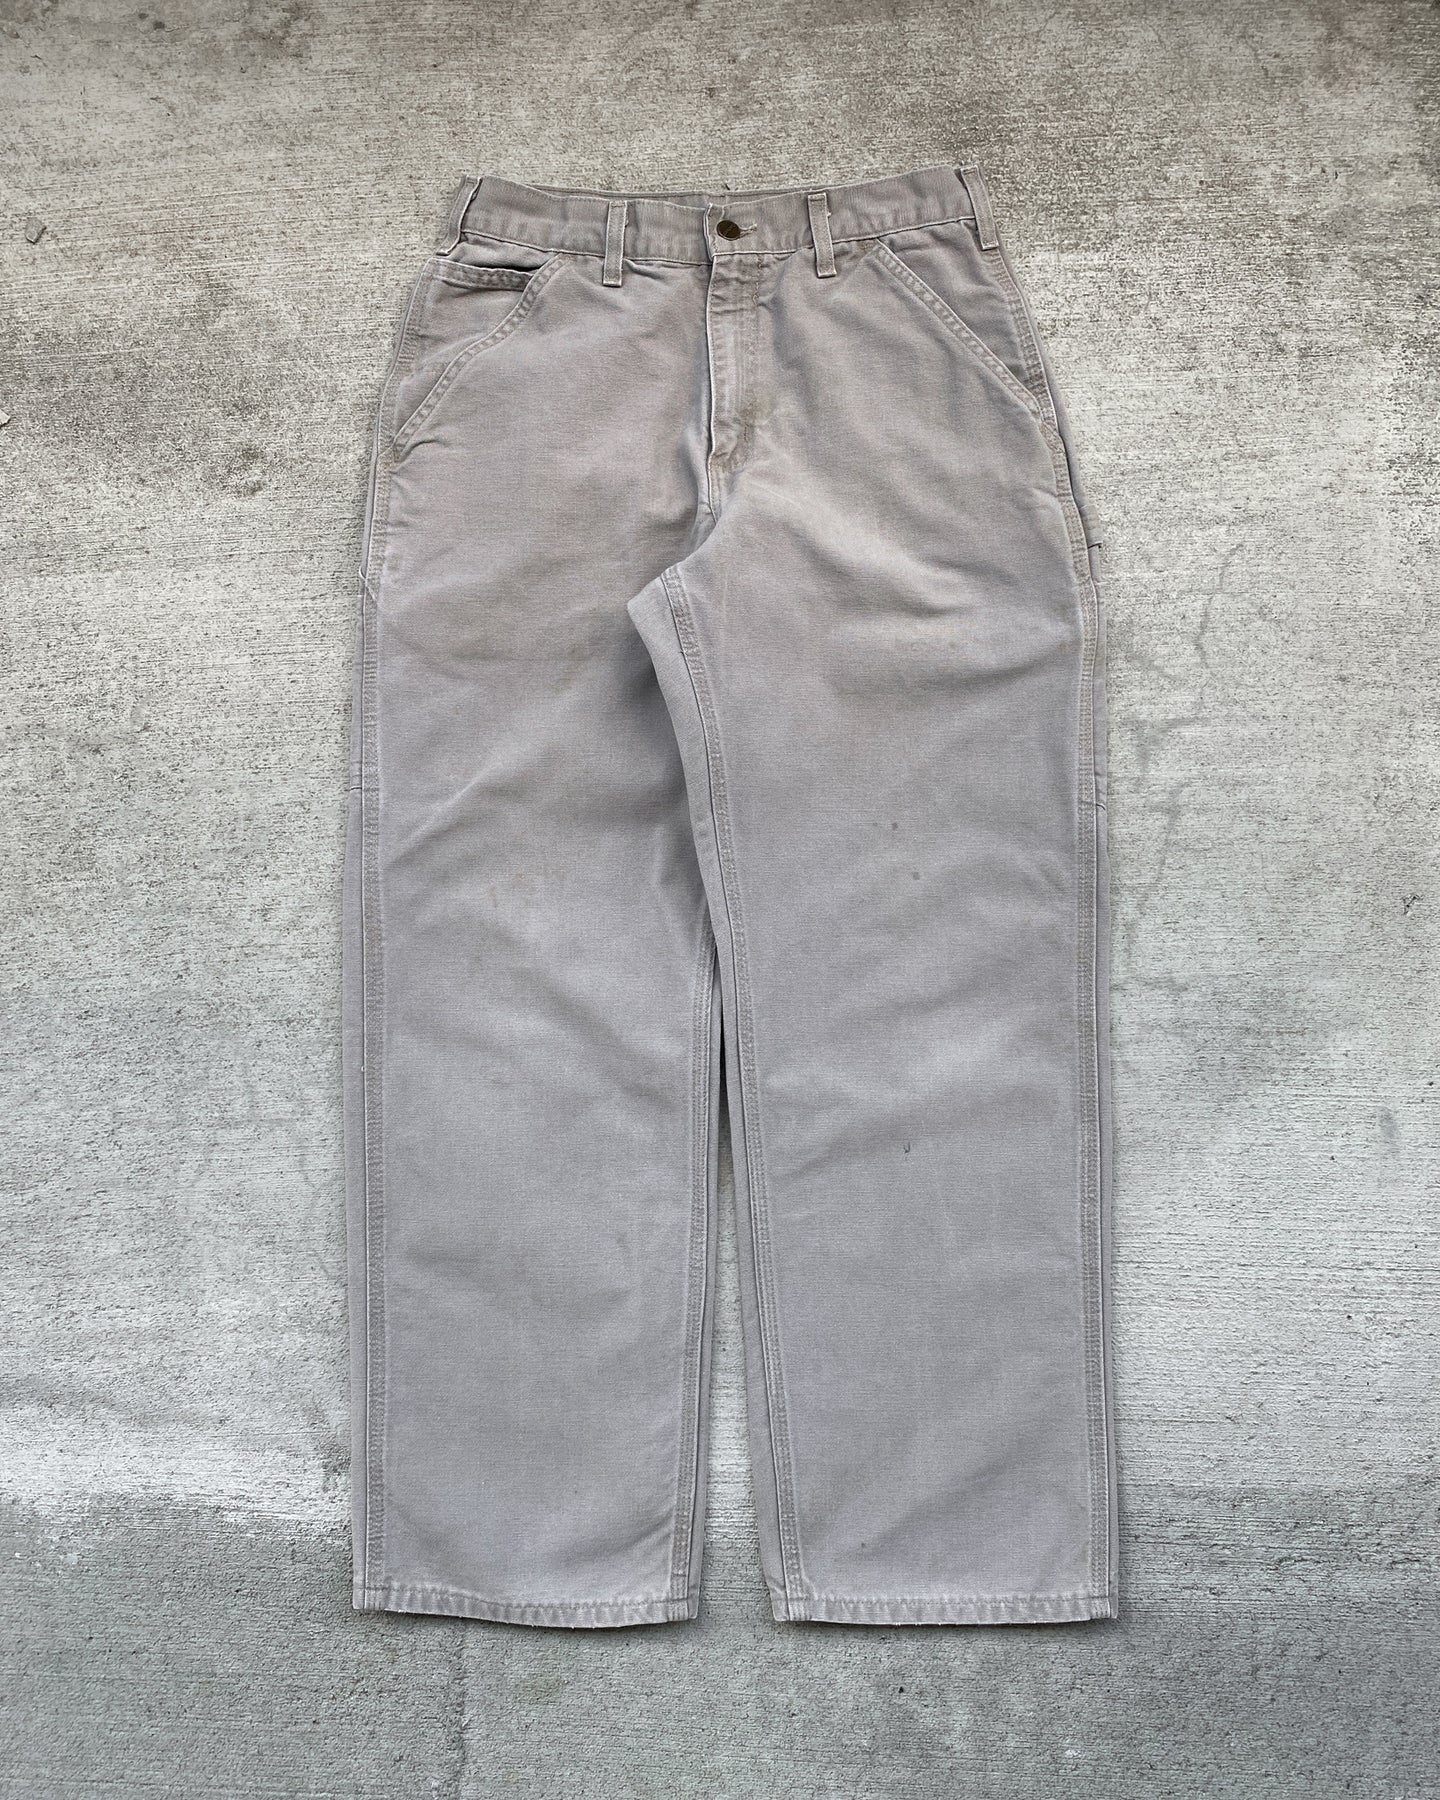 1990s Carhartt Taupe Work Canvas Pants - Size 30 x 30